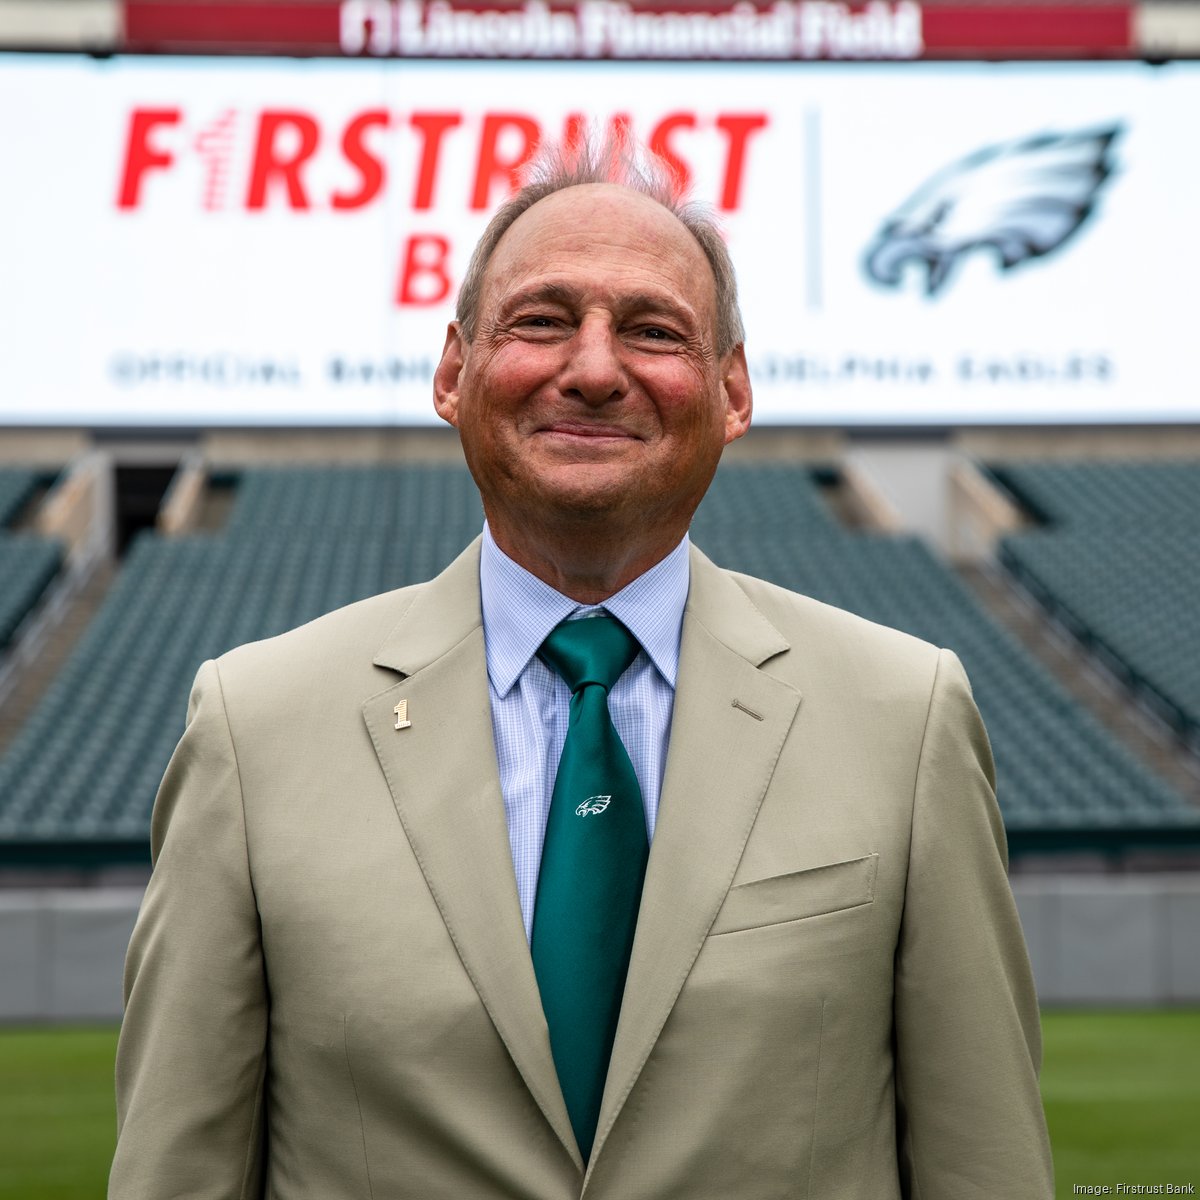 EAGLES PRIDE IN EVERY PURCHASE: FIRSTRUST BANK LAUNCHES NEW KELLY GREEN  DEBIT CARDS